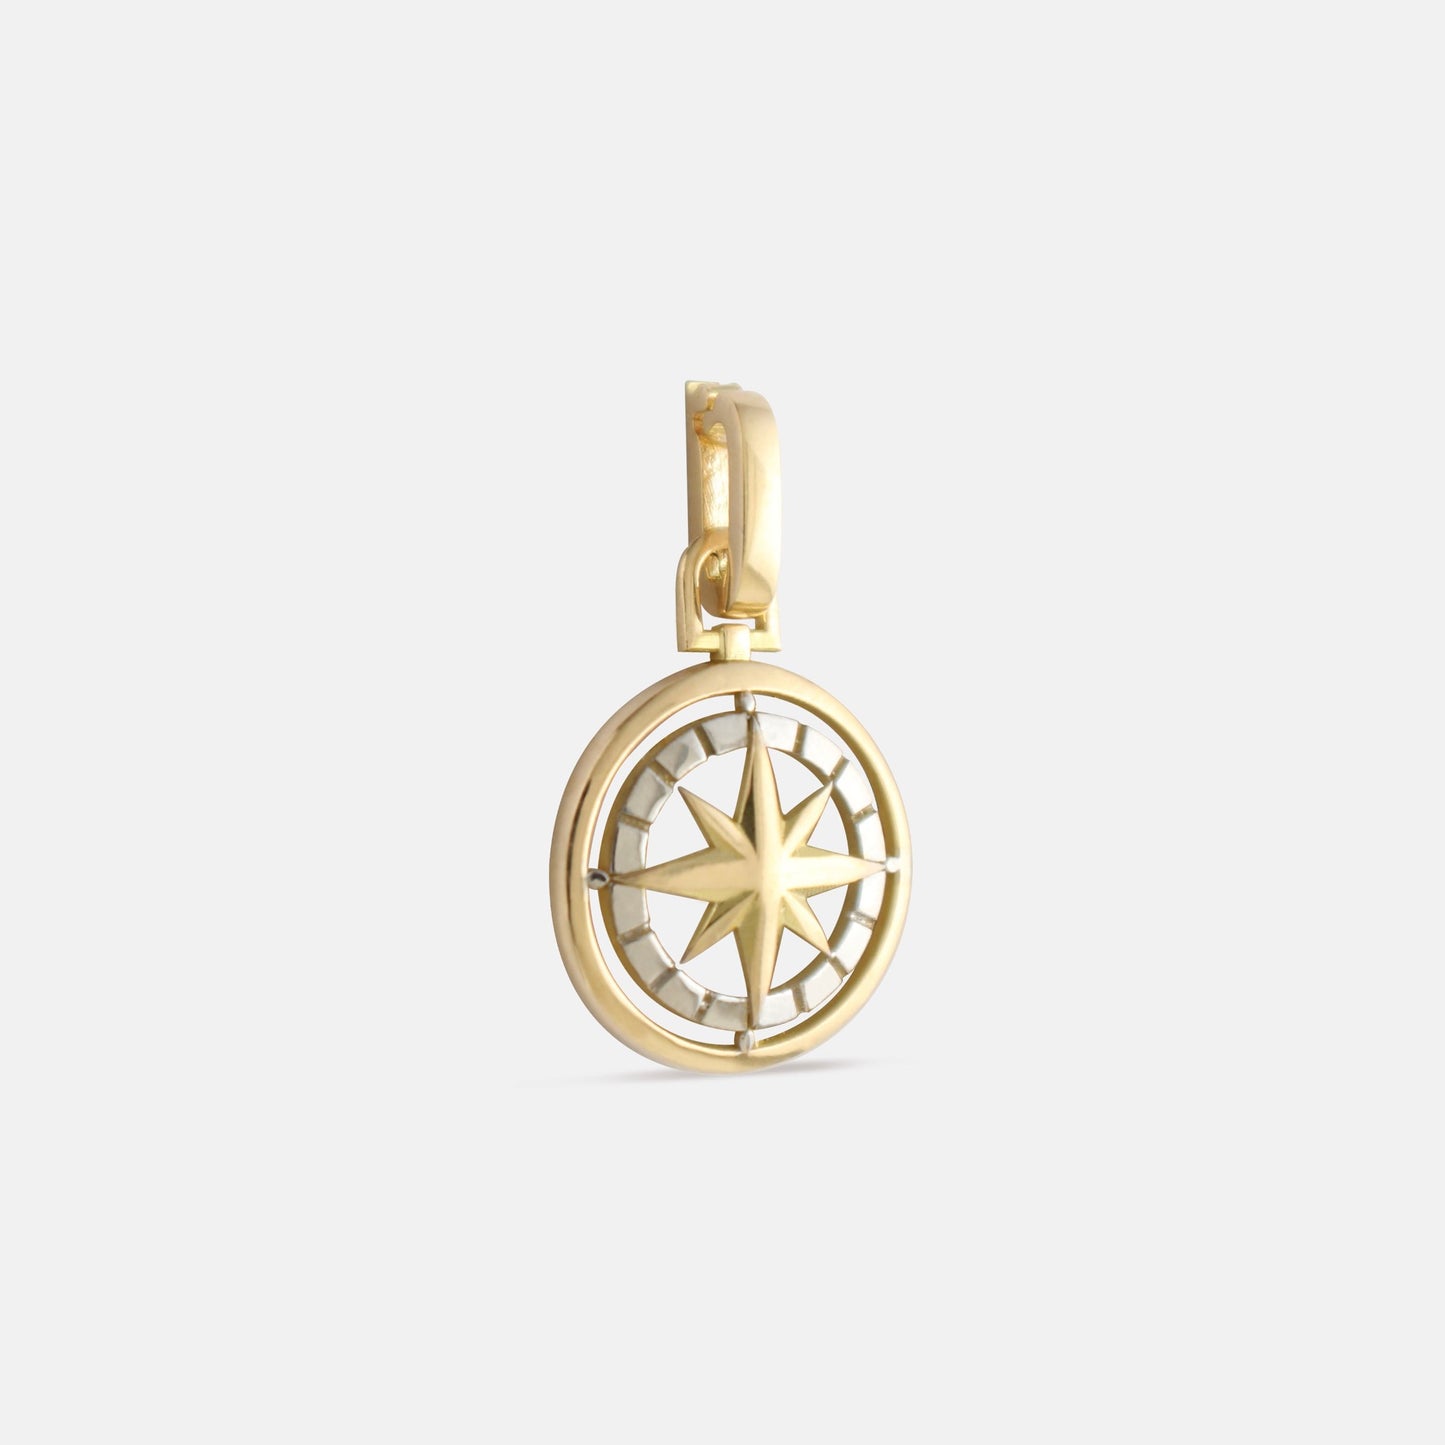 Gold two toned Compass Amulet Charm